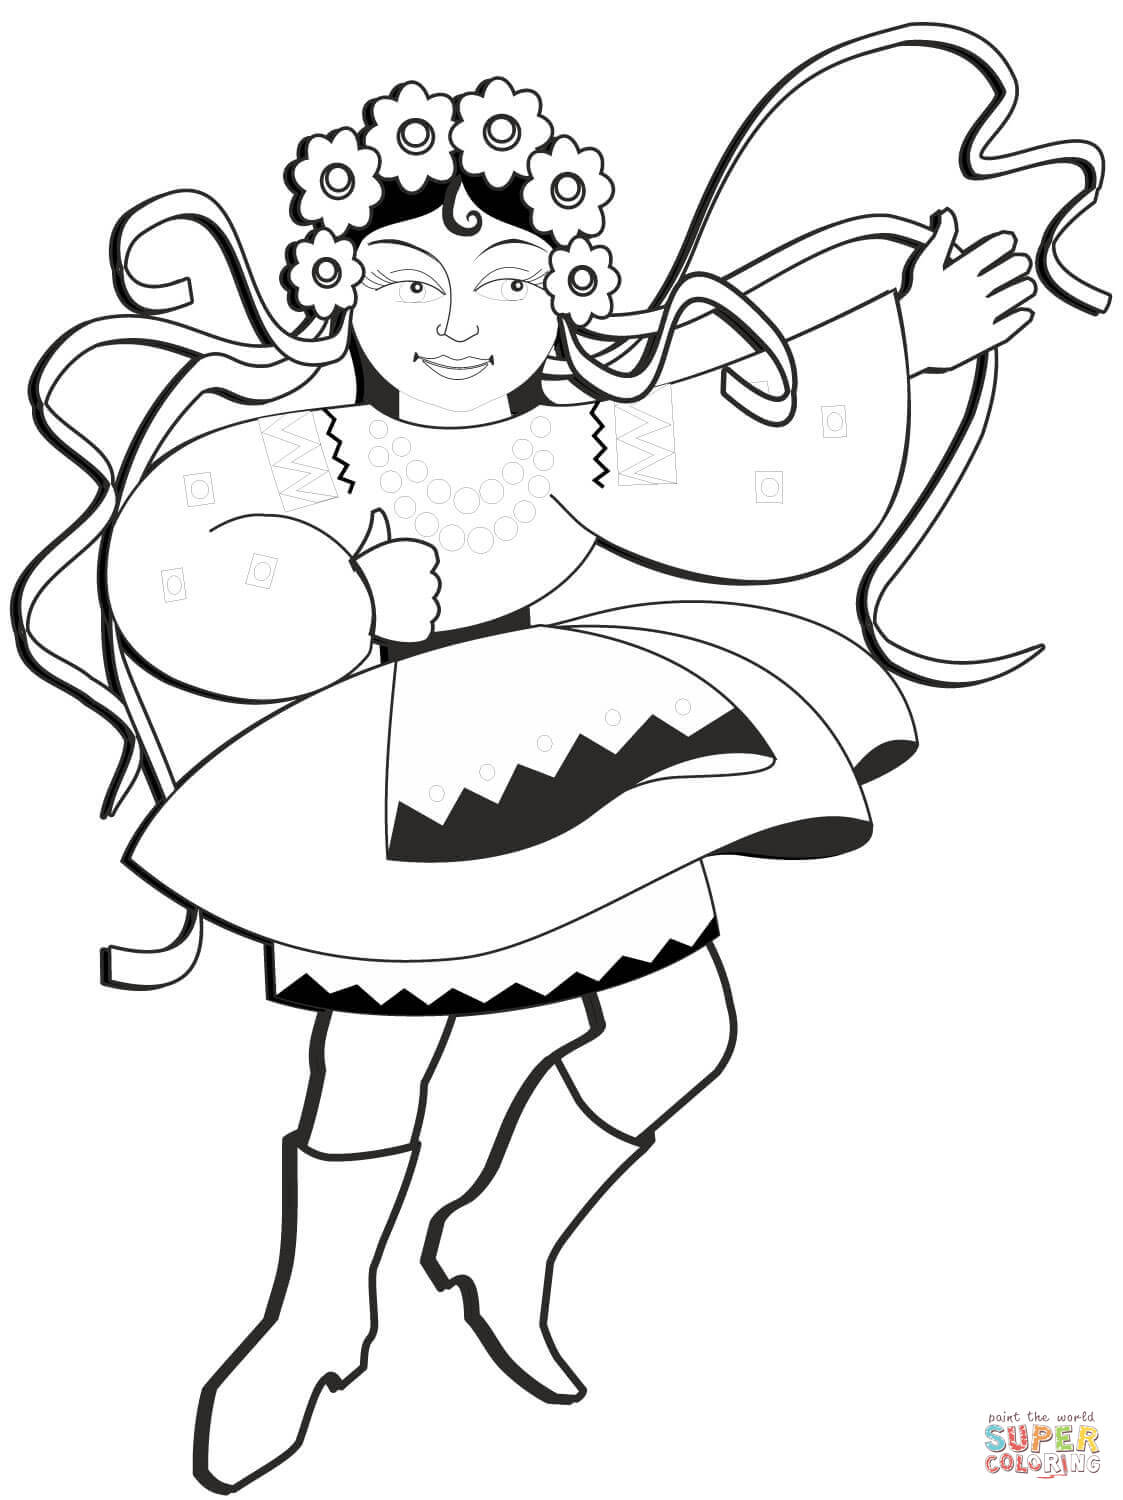 Ukrainian Dancing Woman coloring page | Free Printable Coloring Pages